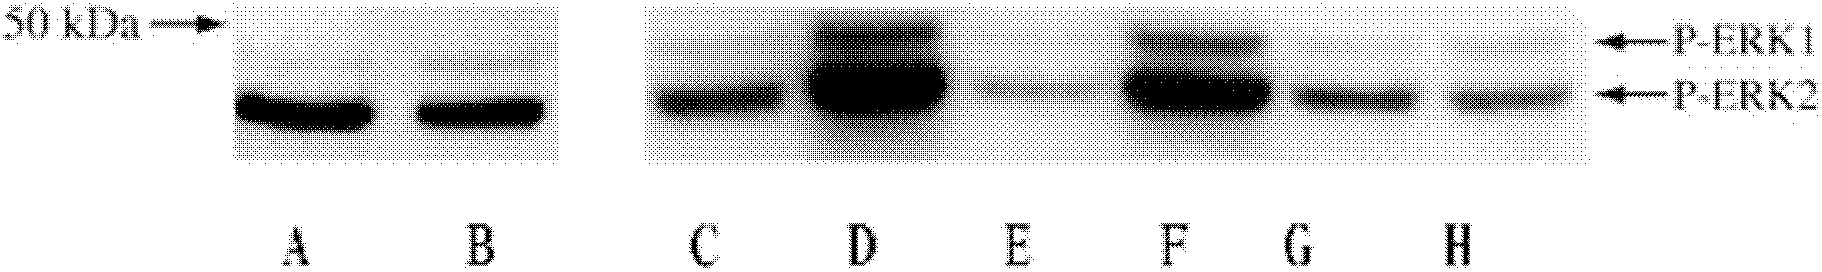 Method for determining retinal cell death process